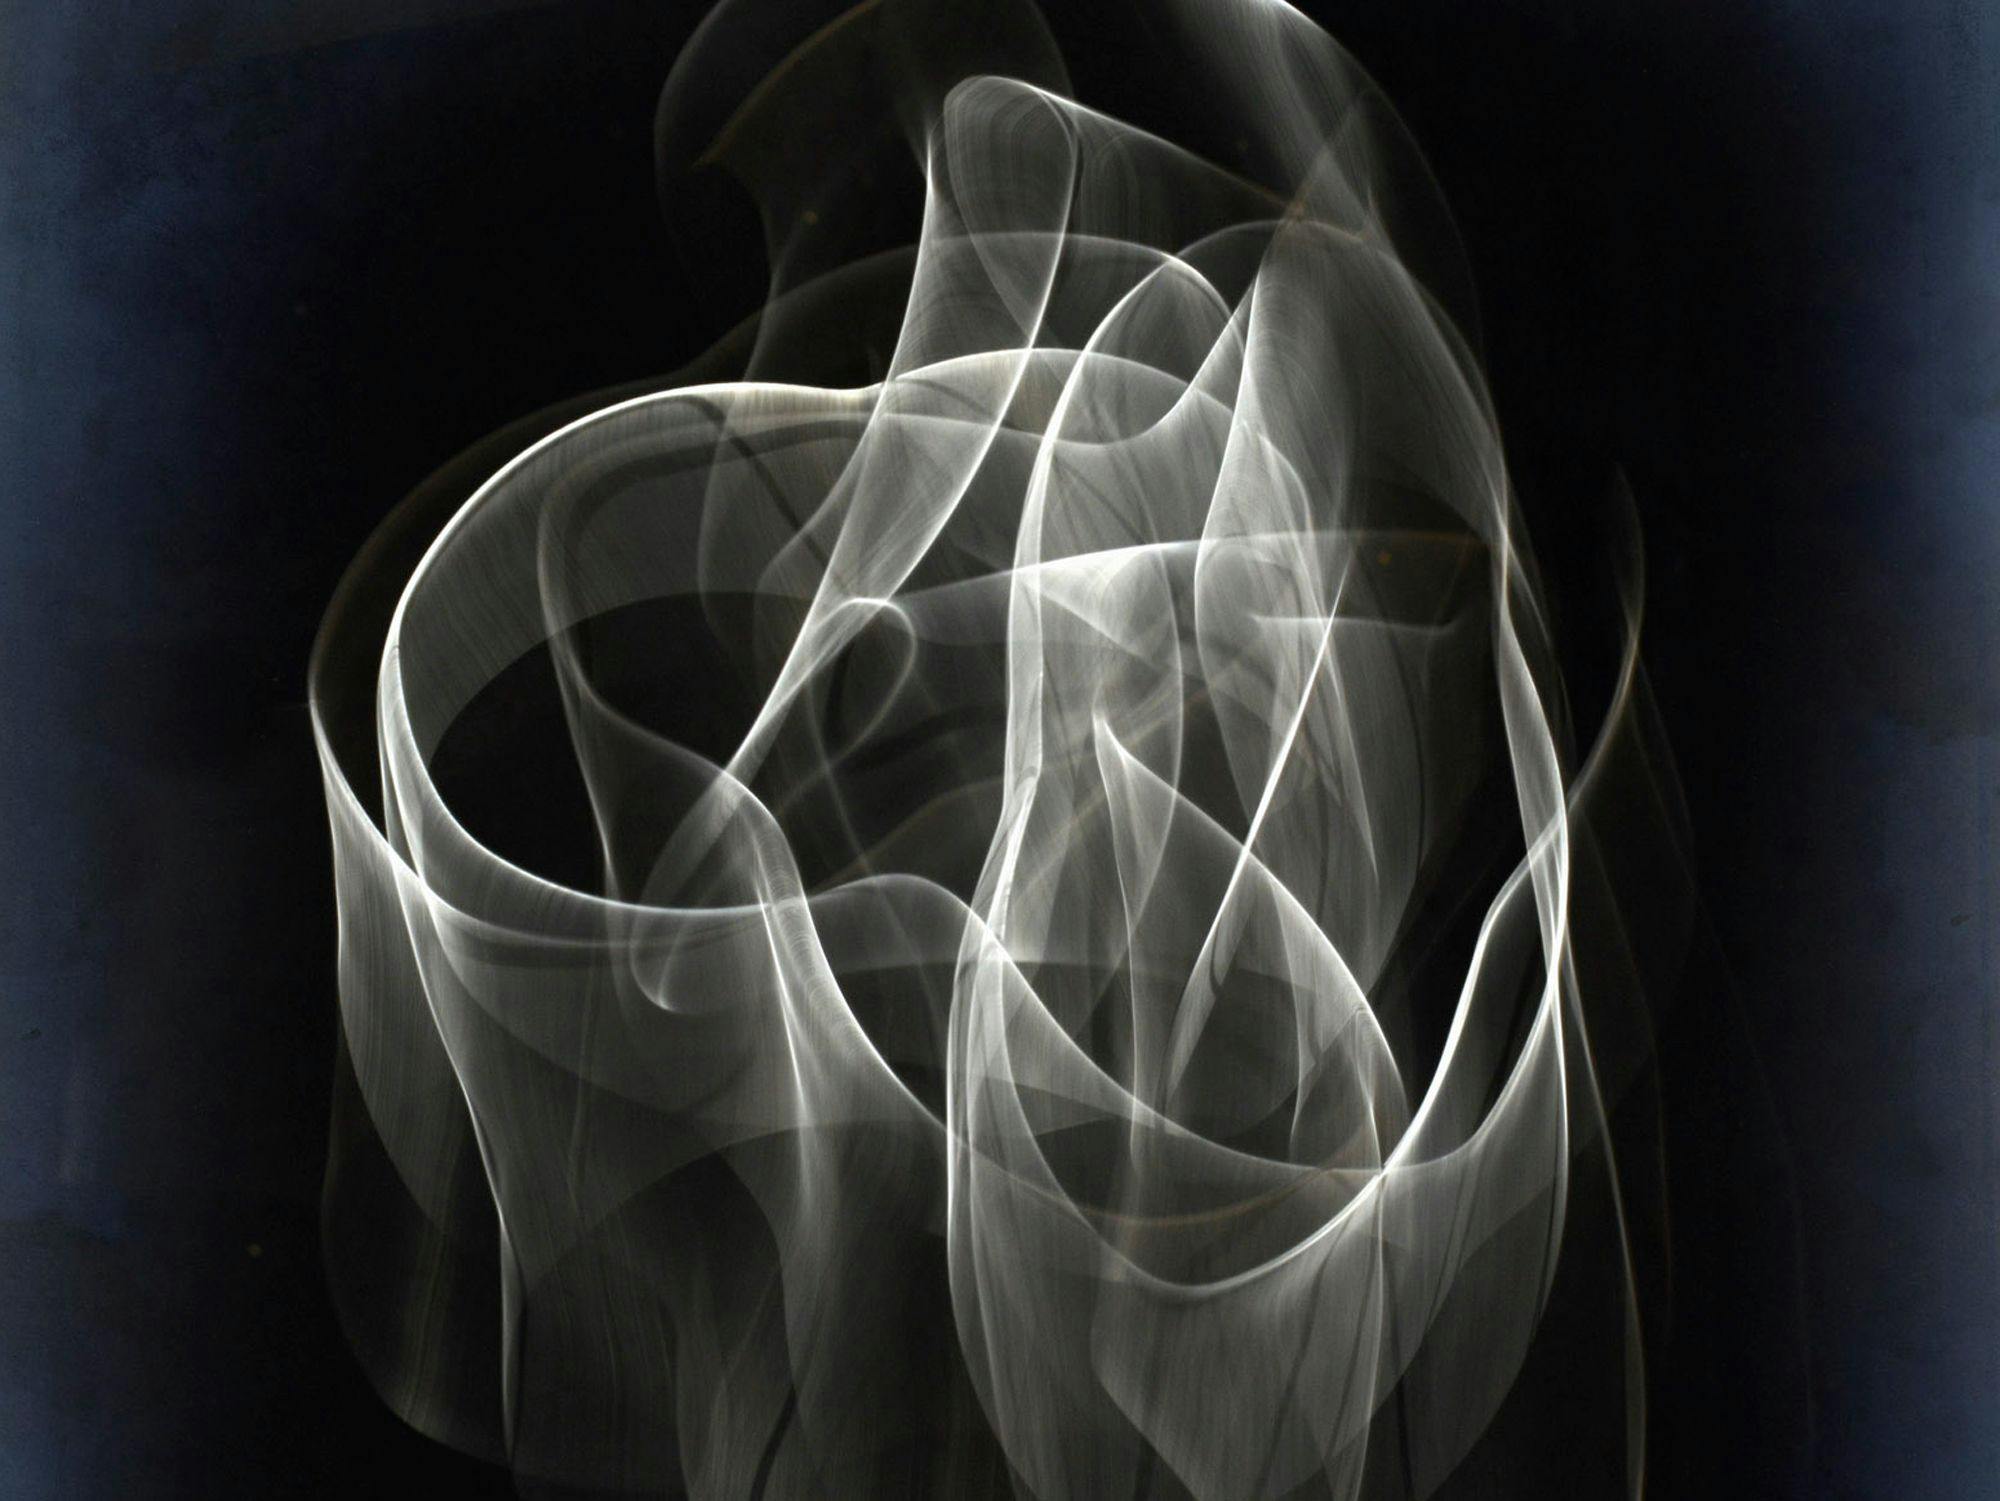 A detail from a photograph by Thomas Ruff, called untitled#15, dated 2022.